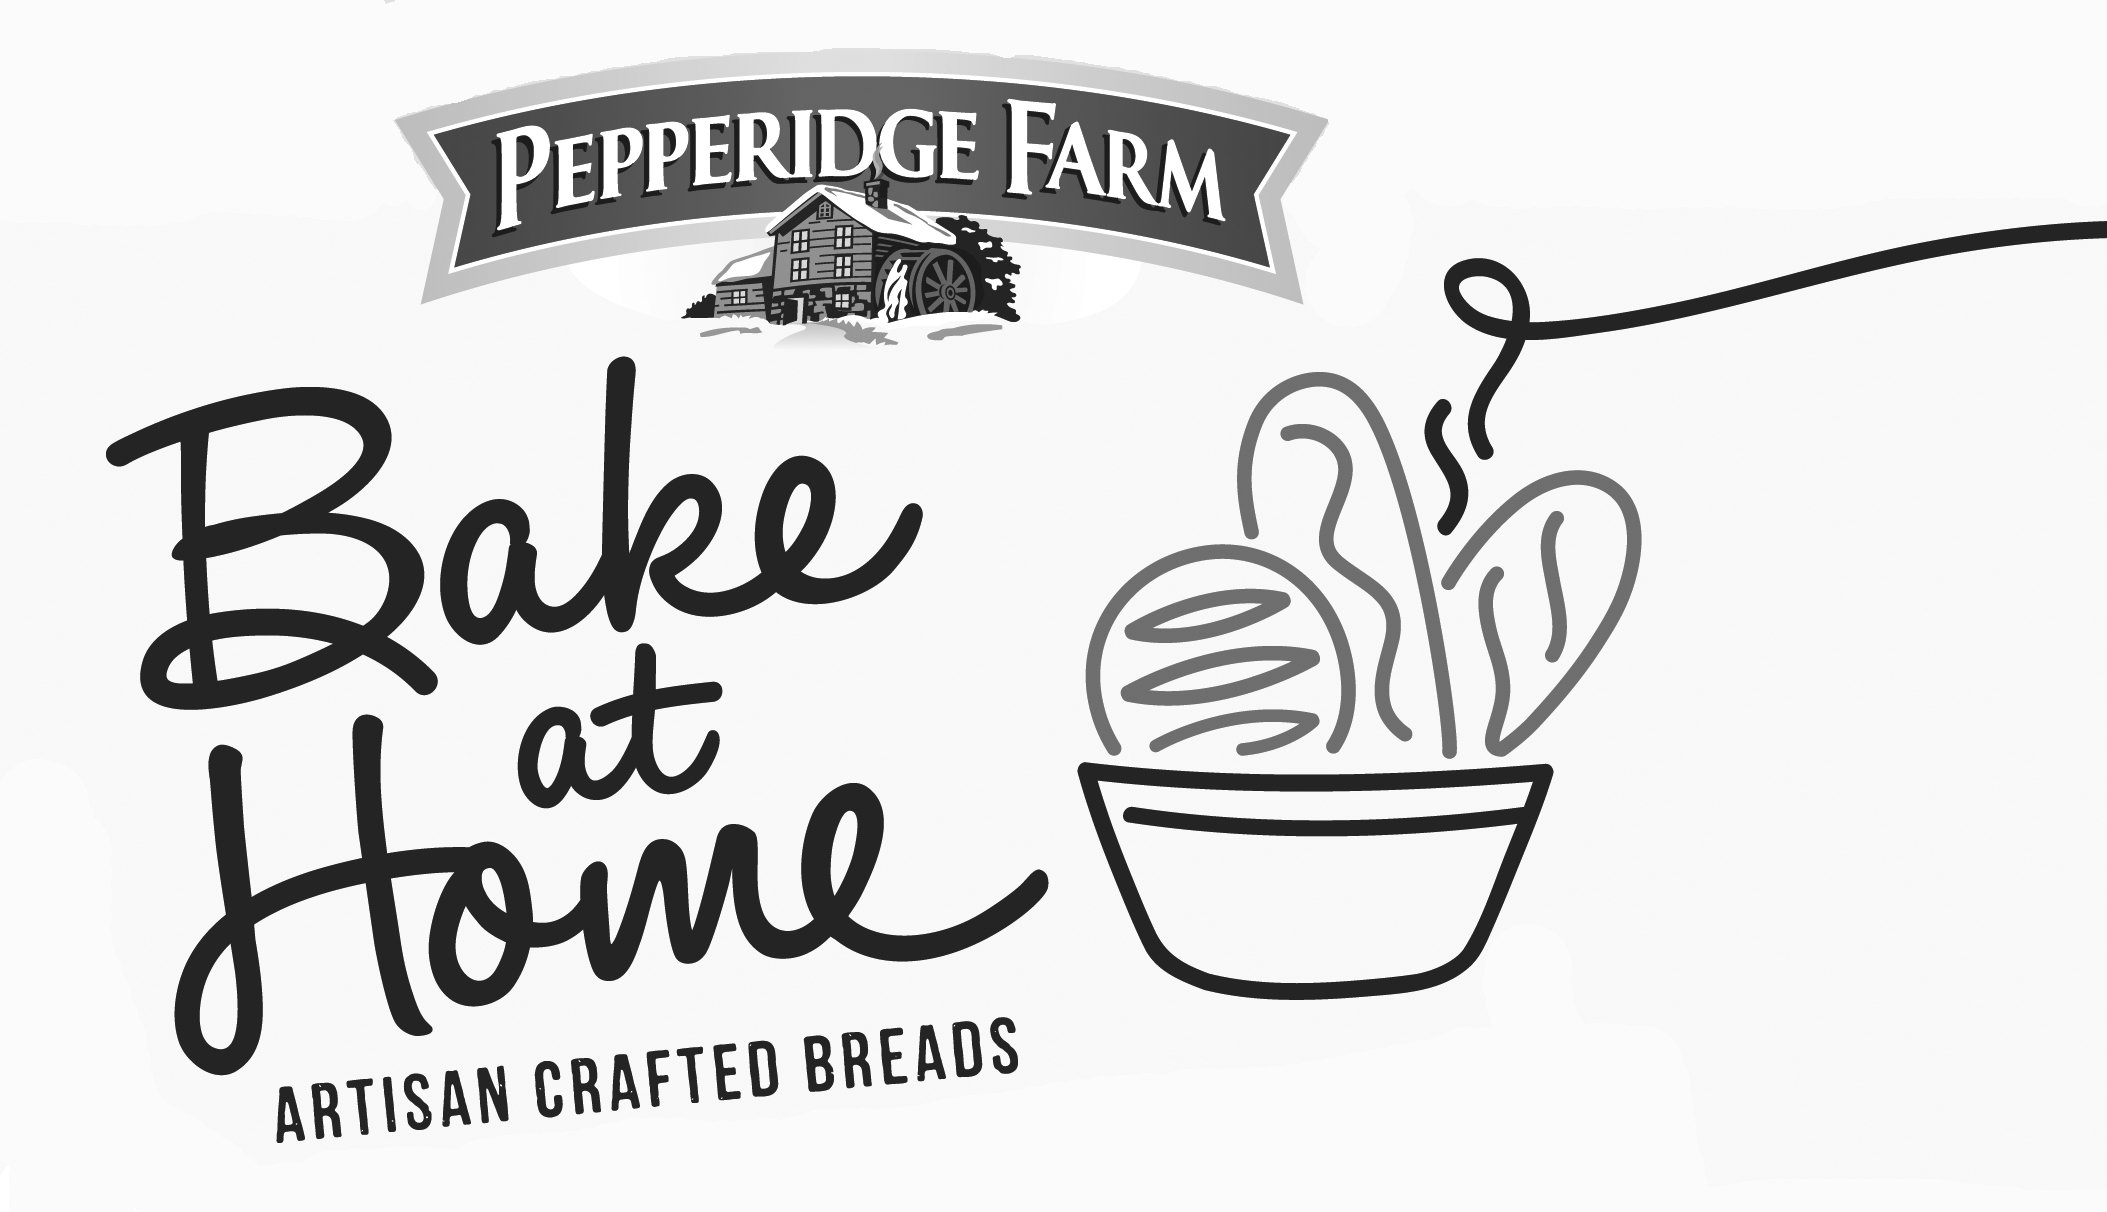  PEPPERIDGE FARM BAKE AT HOME ARTISAN CRAFTED BREADS